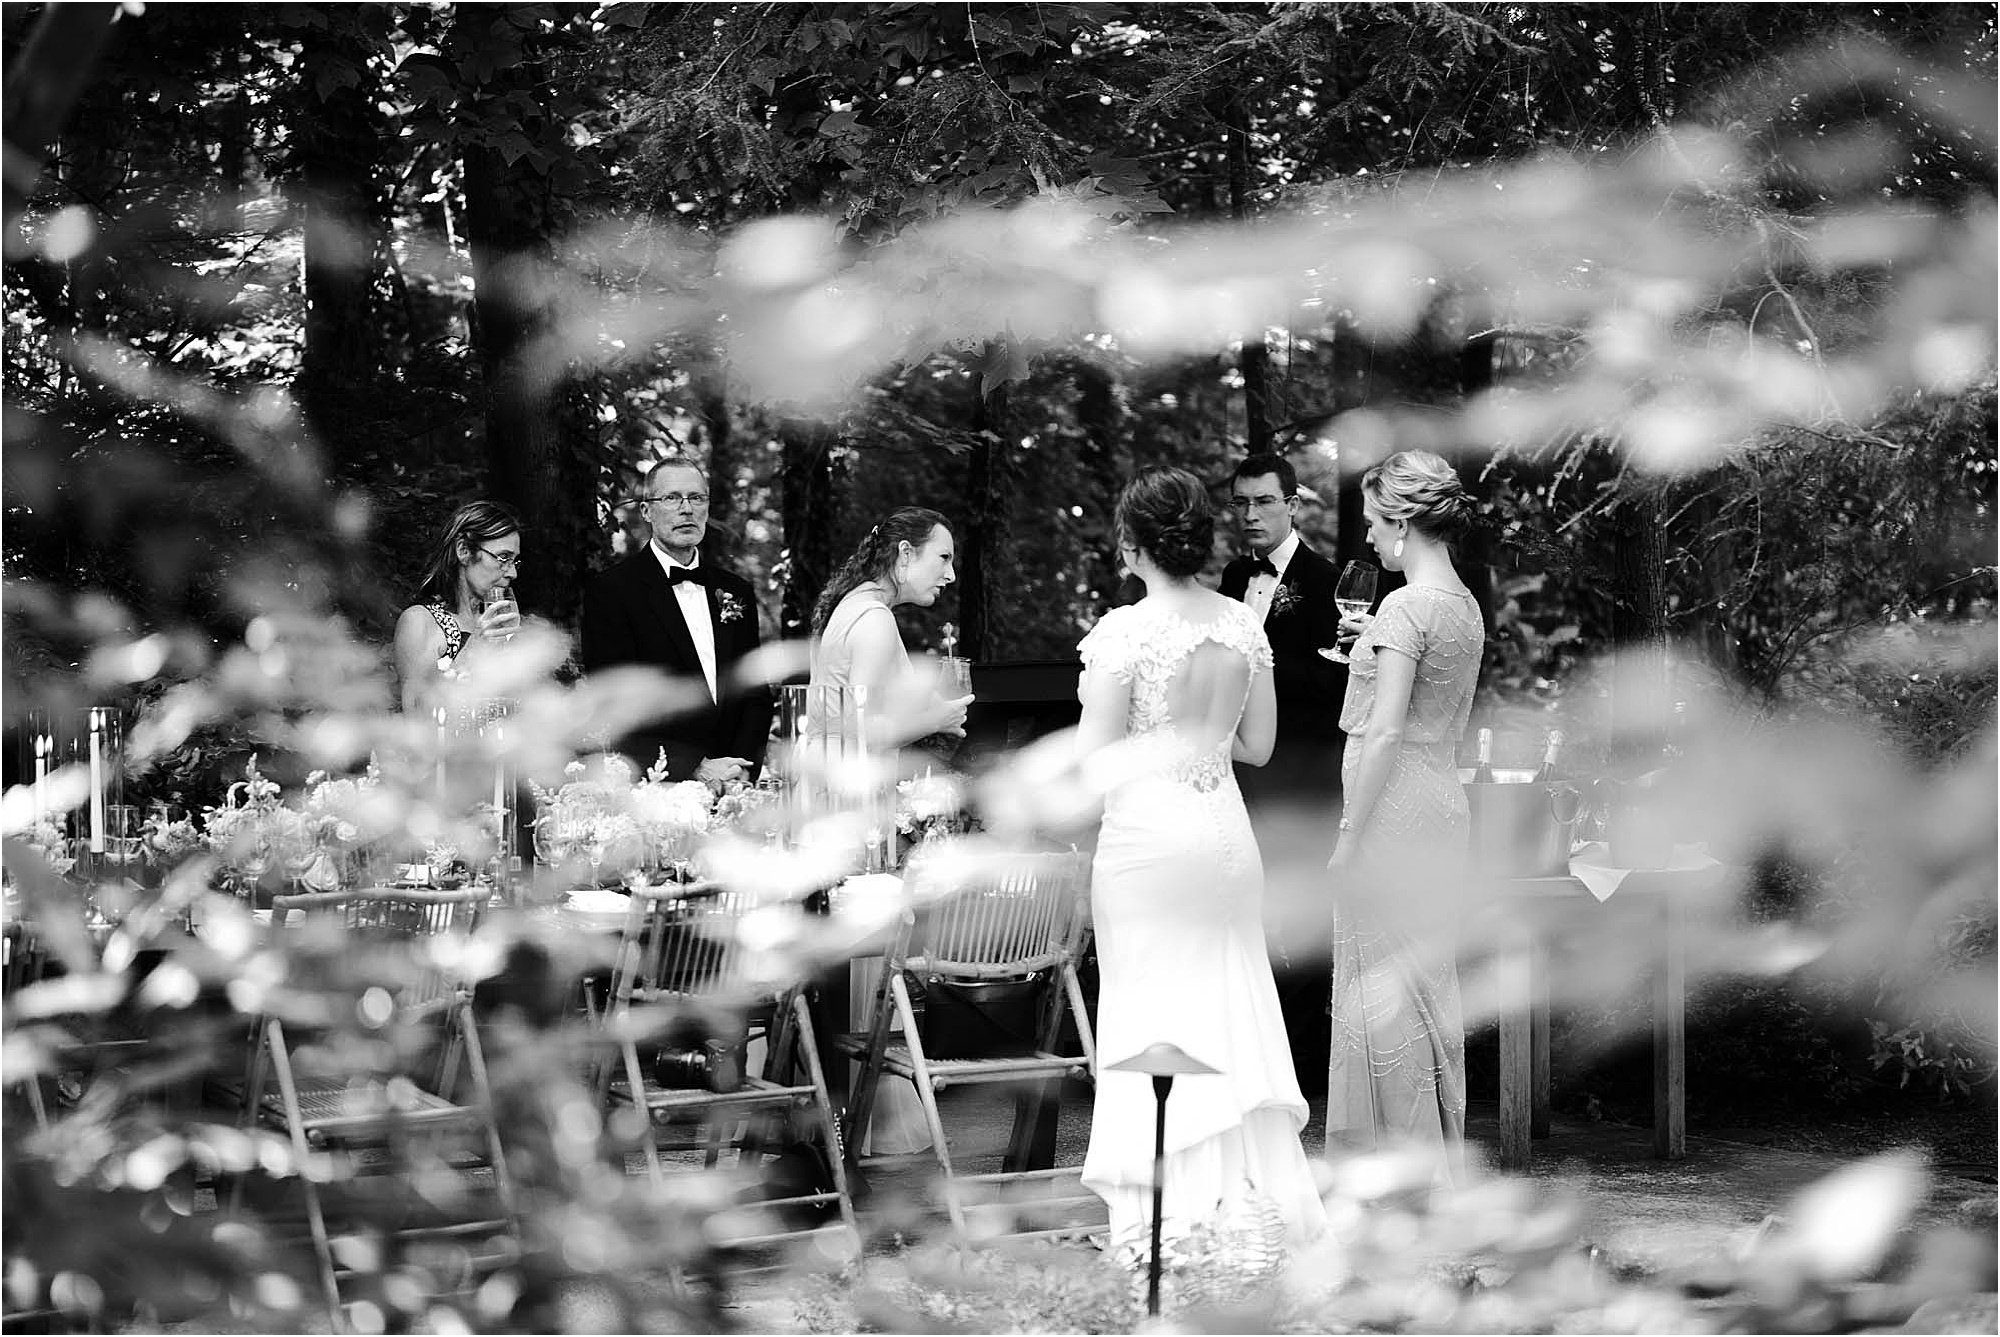 guests mingling with bride and groom at wedding